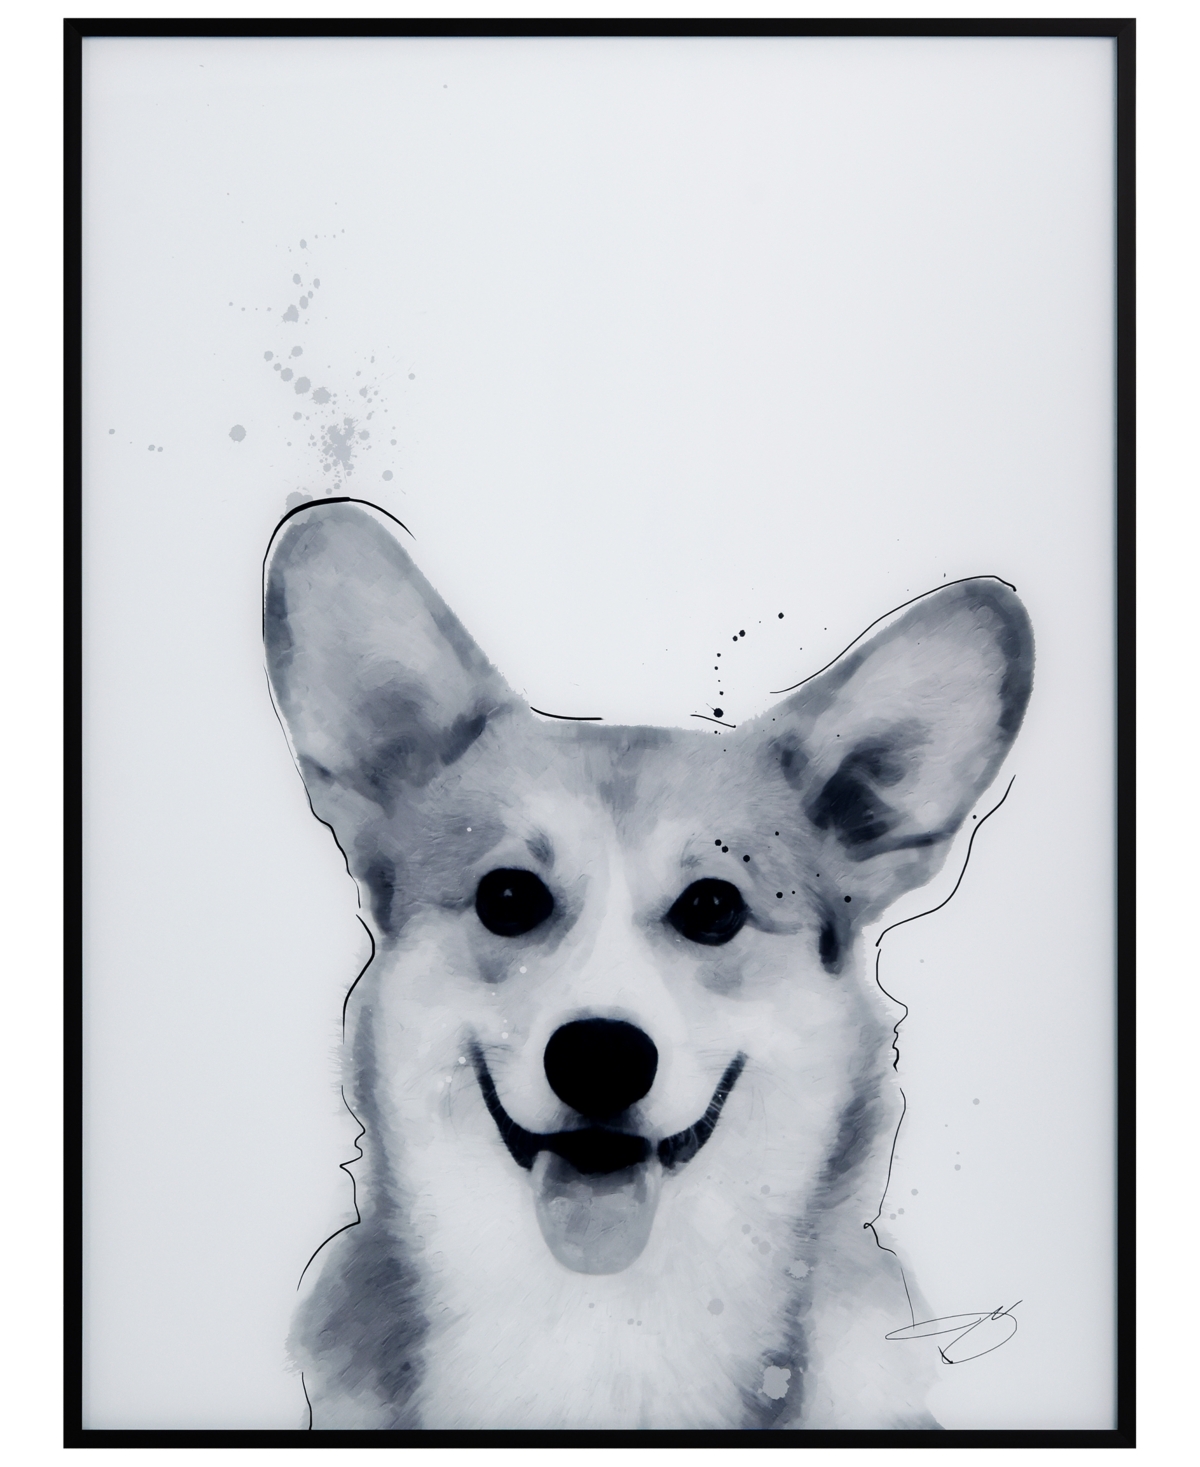 Empire Art Direct "corgi" Pet Paintings On Printed Glass Encased With A Black Anodized Frame, 24" X 18" X 1" In Black And White